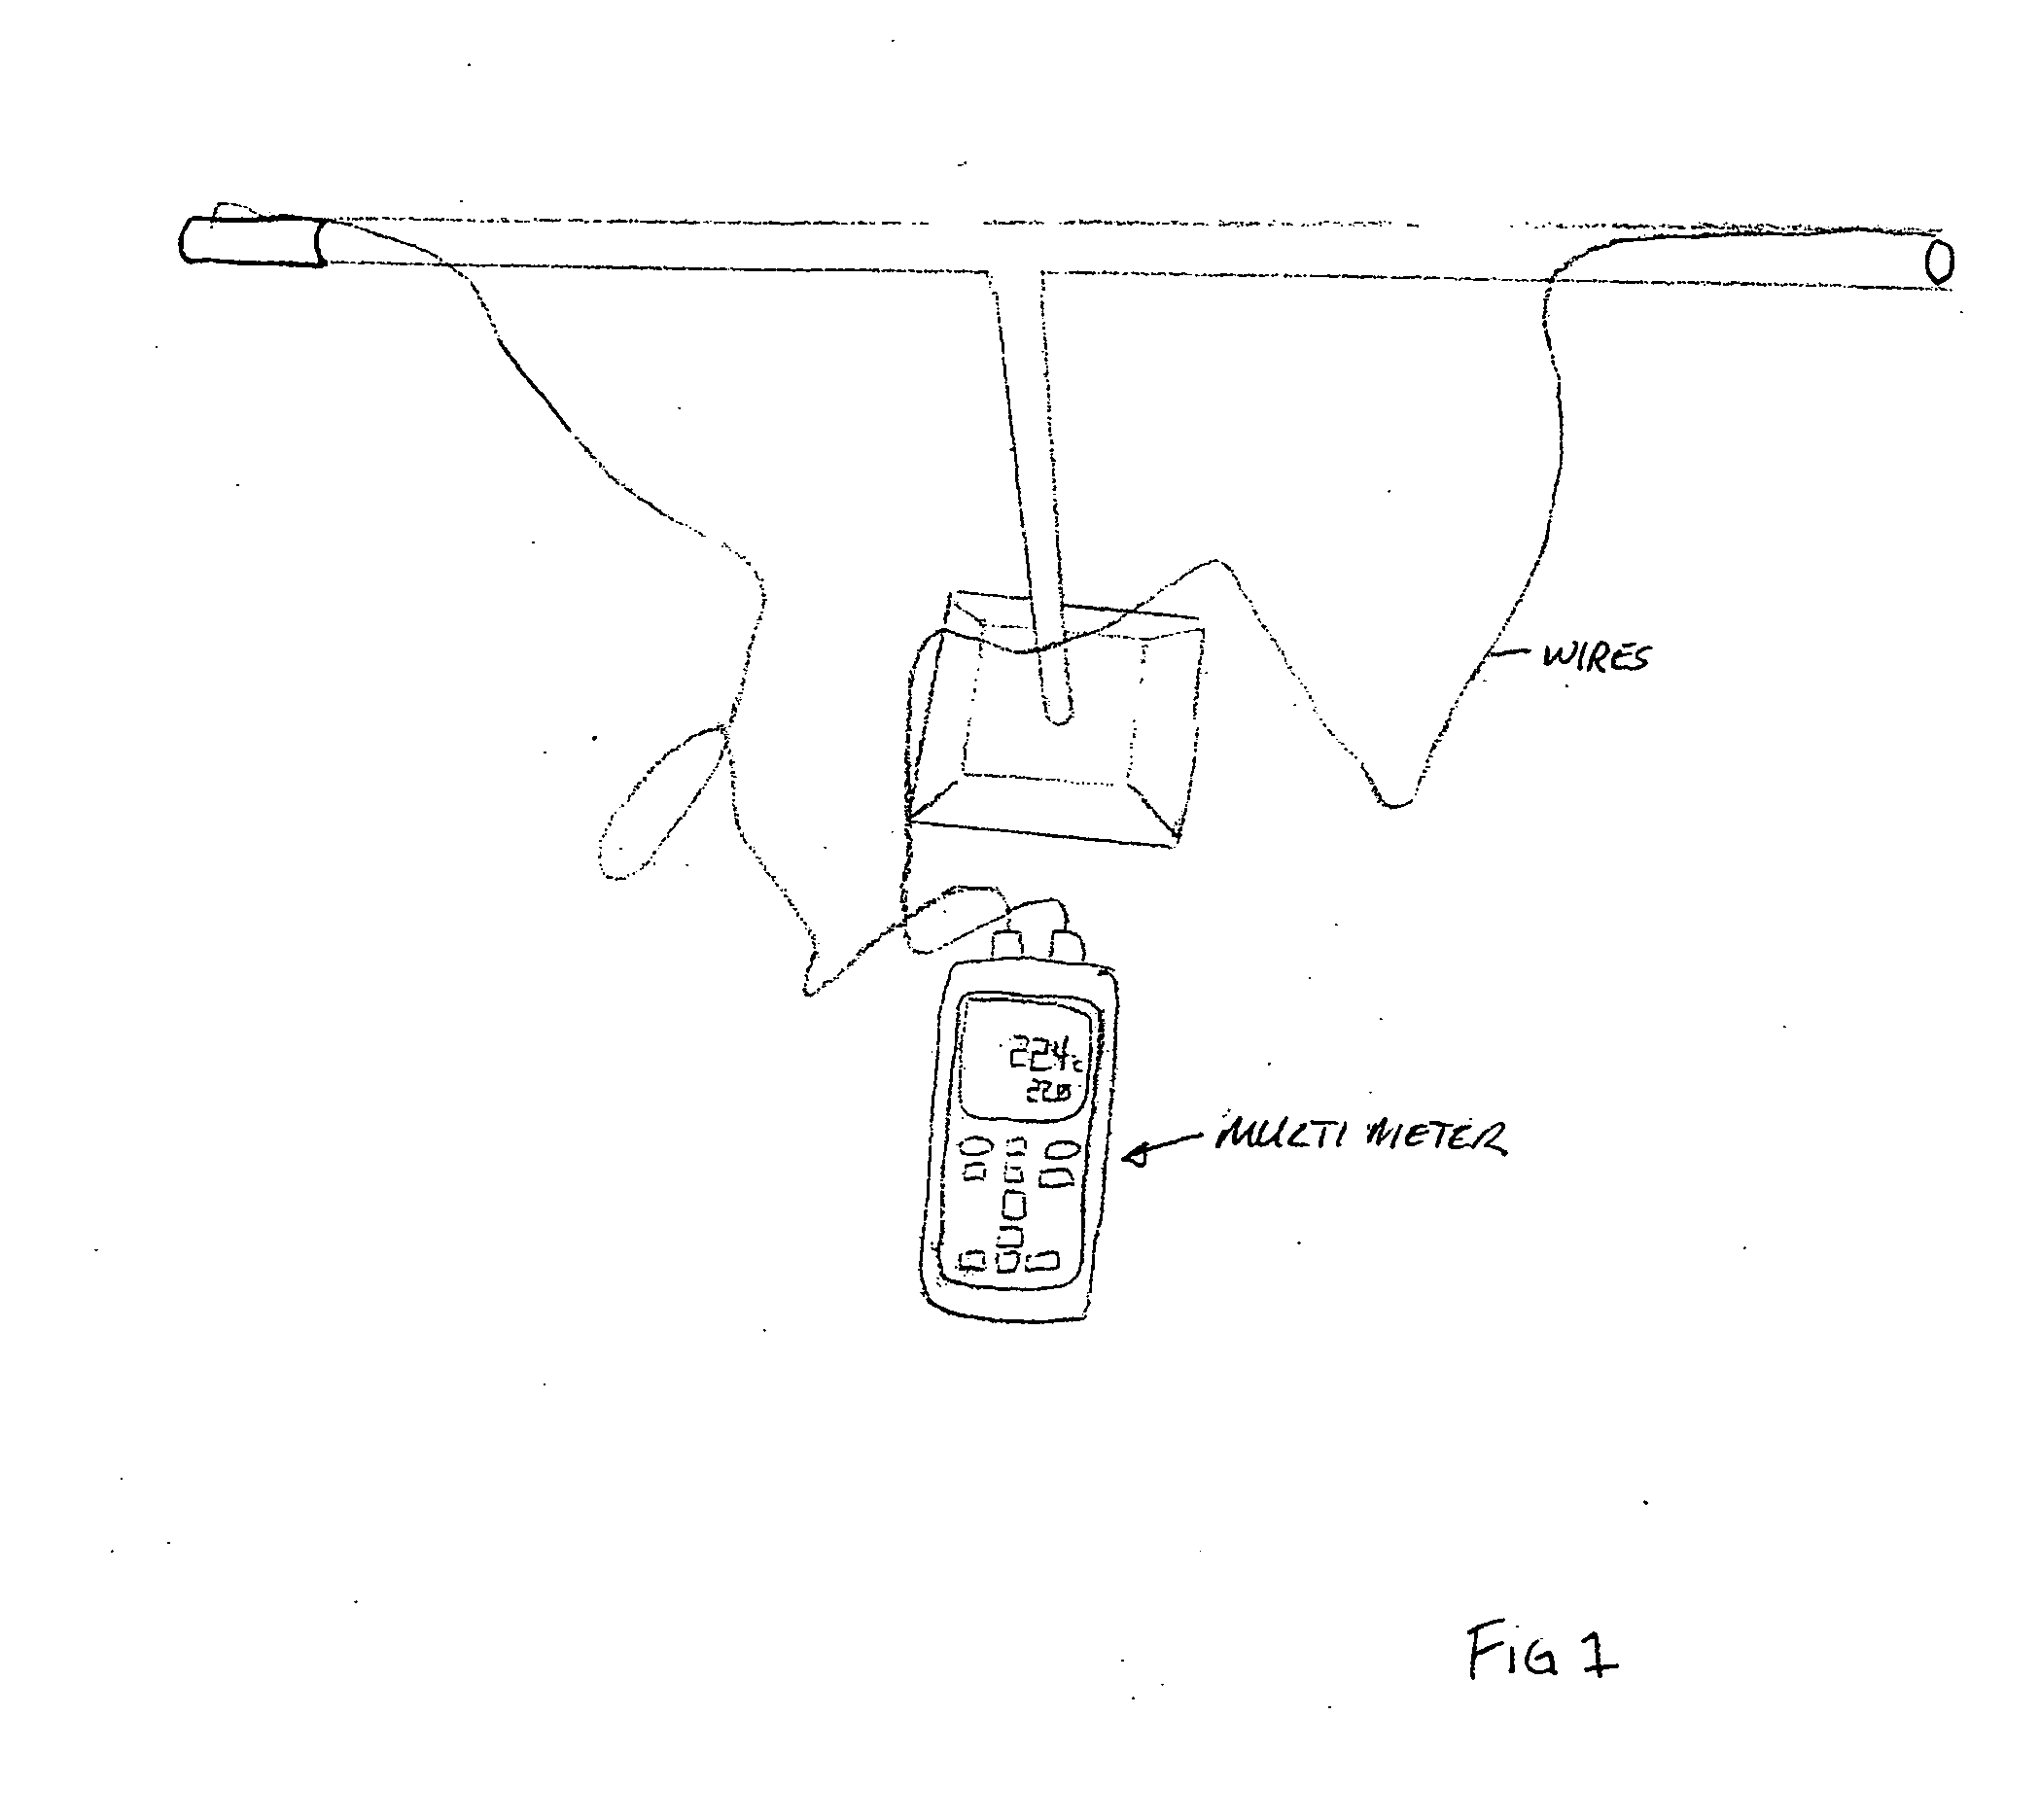 Method and apparatus for generating electricity using ambient heat